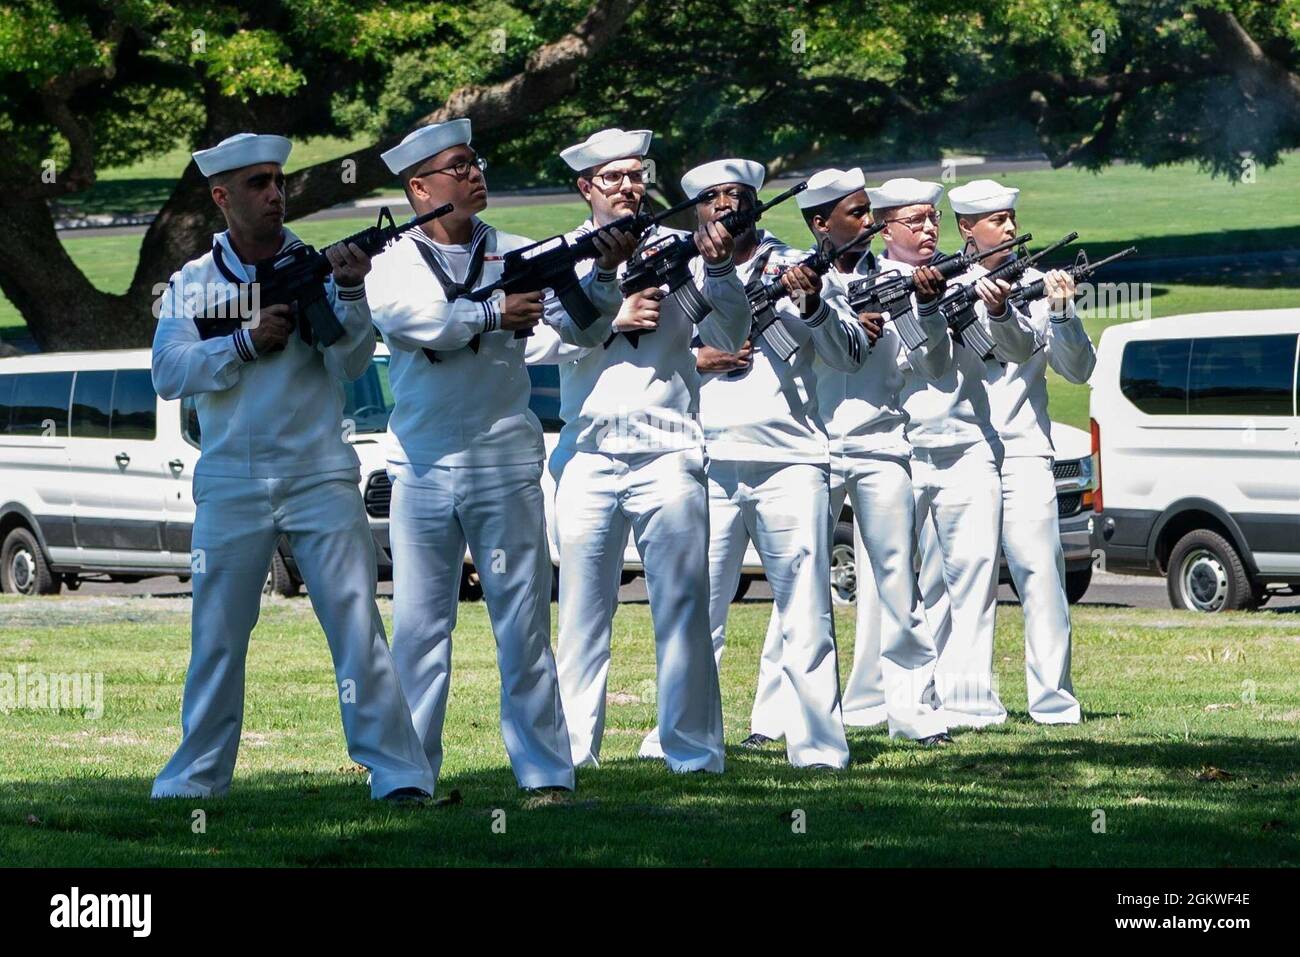 Sailors assigned to U.S. Navy Region Hawaii conduct a funeral for U.S. Navy Musician 2nd Class Charlton Hanna Ferguson, 19, of Kosciusko, Missouri at the National Memorial Cemetery of the Pacific, Honolulu, Hawaii, July 9, 2021. Ferguson was assigned to the USS Oklahoma when it sustained fire from Japanese aircraft and multiple torpedo hits. The result of the attack capsized the battleship causing the deaths of 429 crew members on Dec. 7, 1941, at Ford Island, Pearl Harbor. Ferguson was identified Dec. 17, 2020 through DNA analysis by the Defense POW/MIA Accounting Agency (DPAA) forensic labor Stock Photo